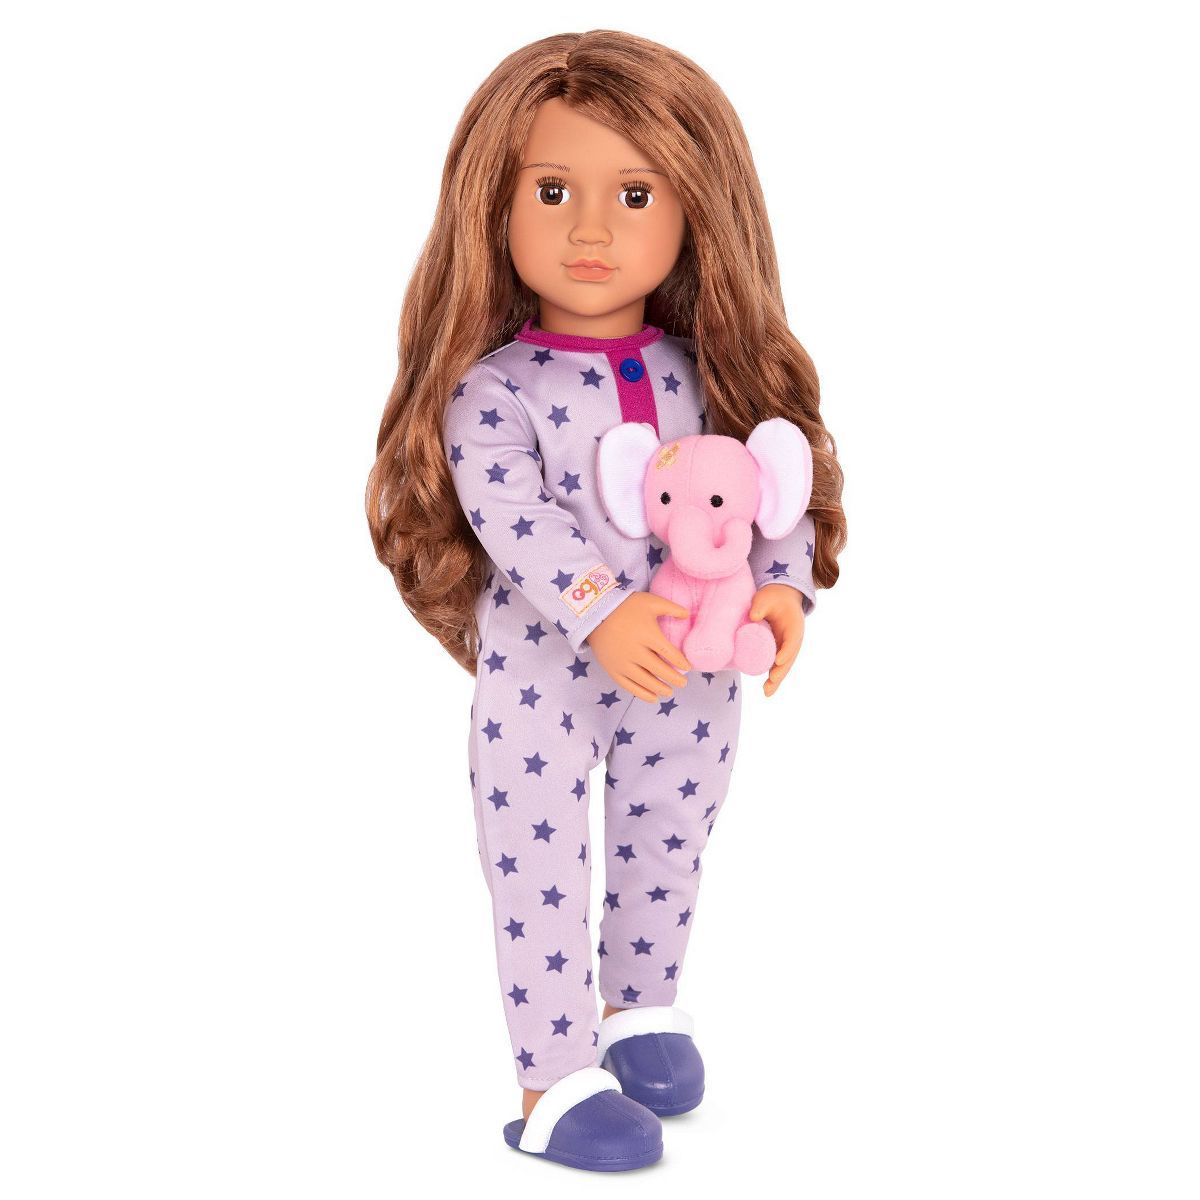 Our Generation 18" Slumber Party Doll - Maria | Target